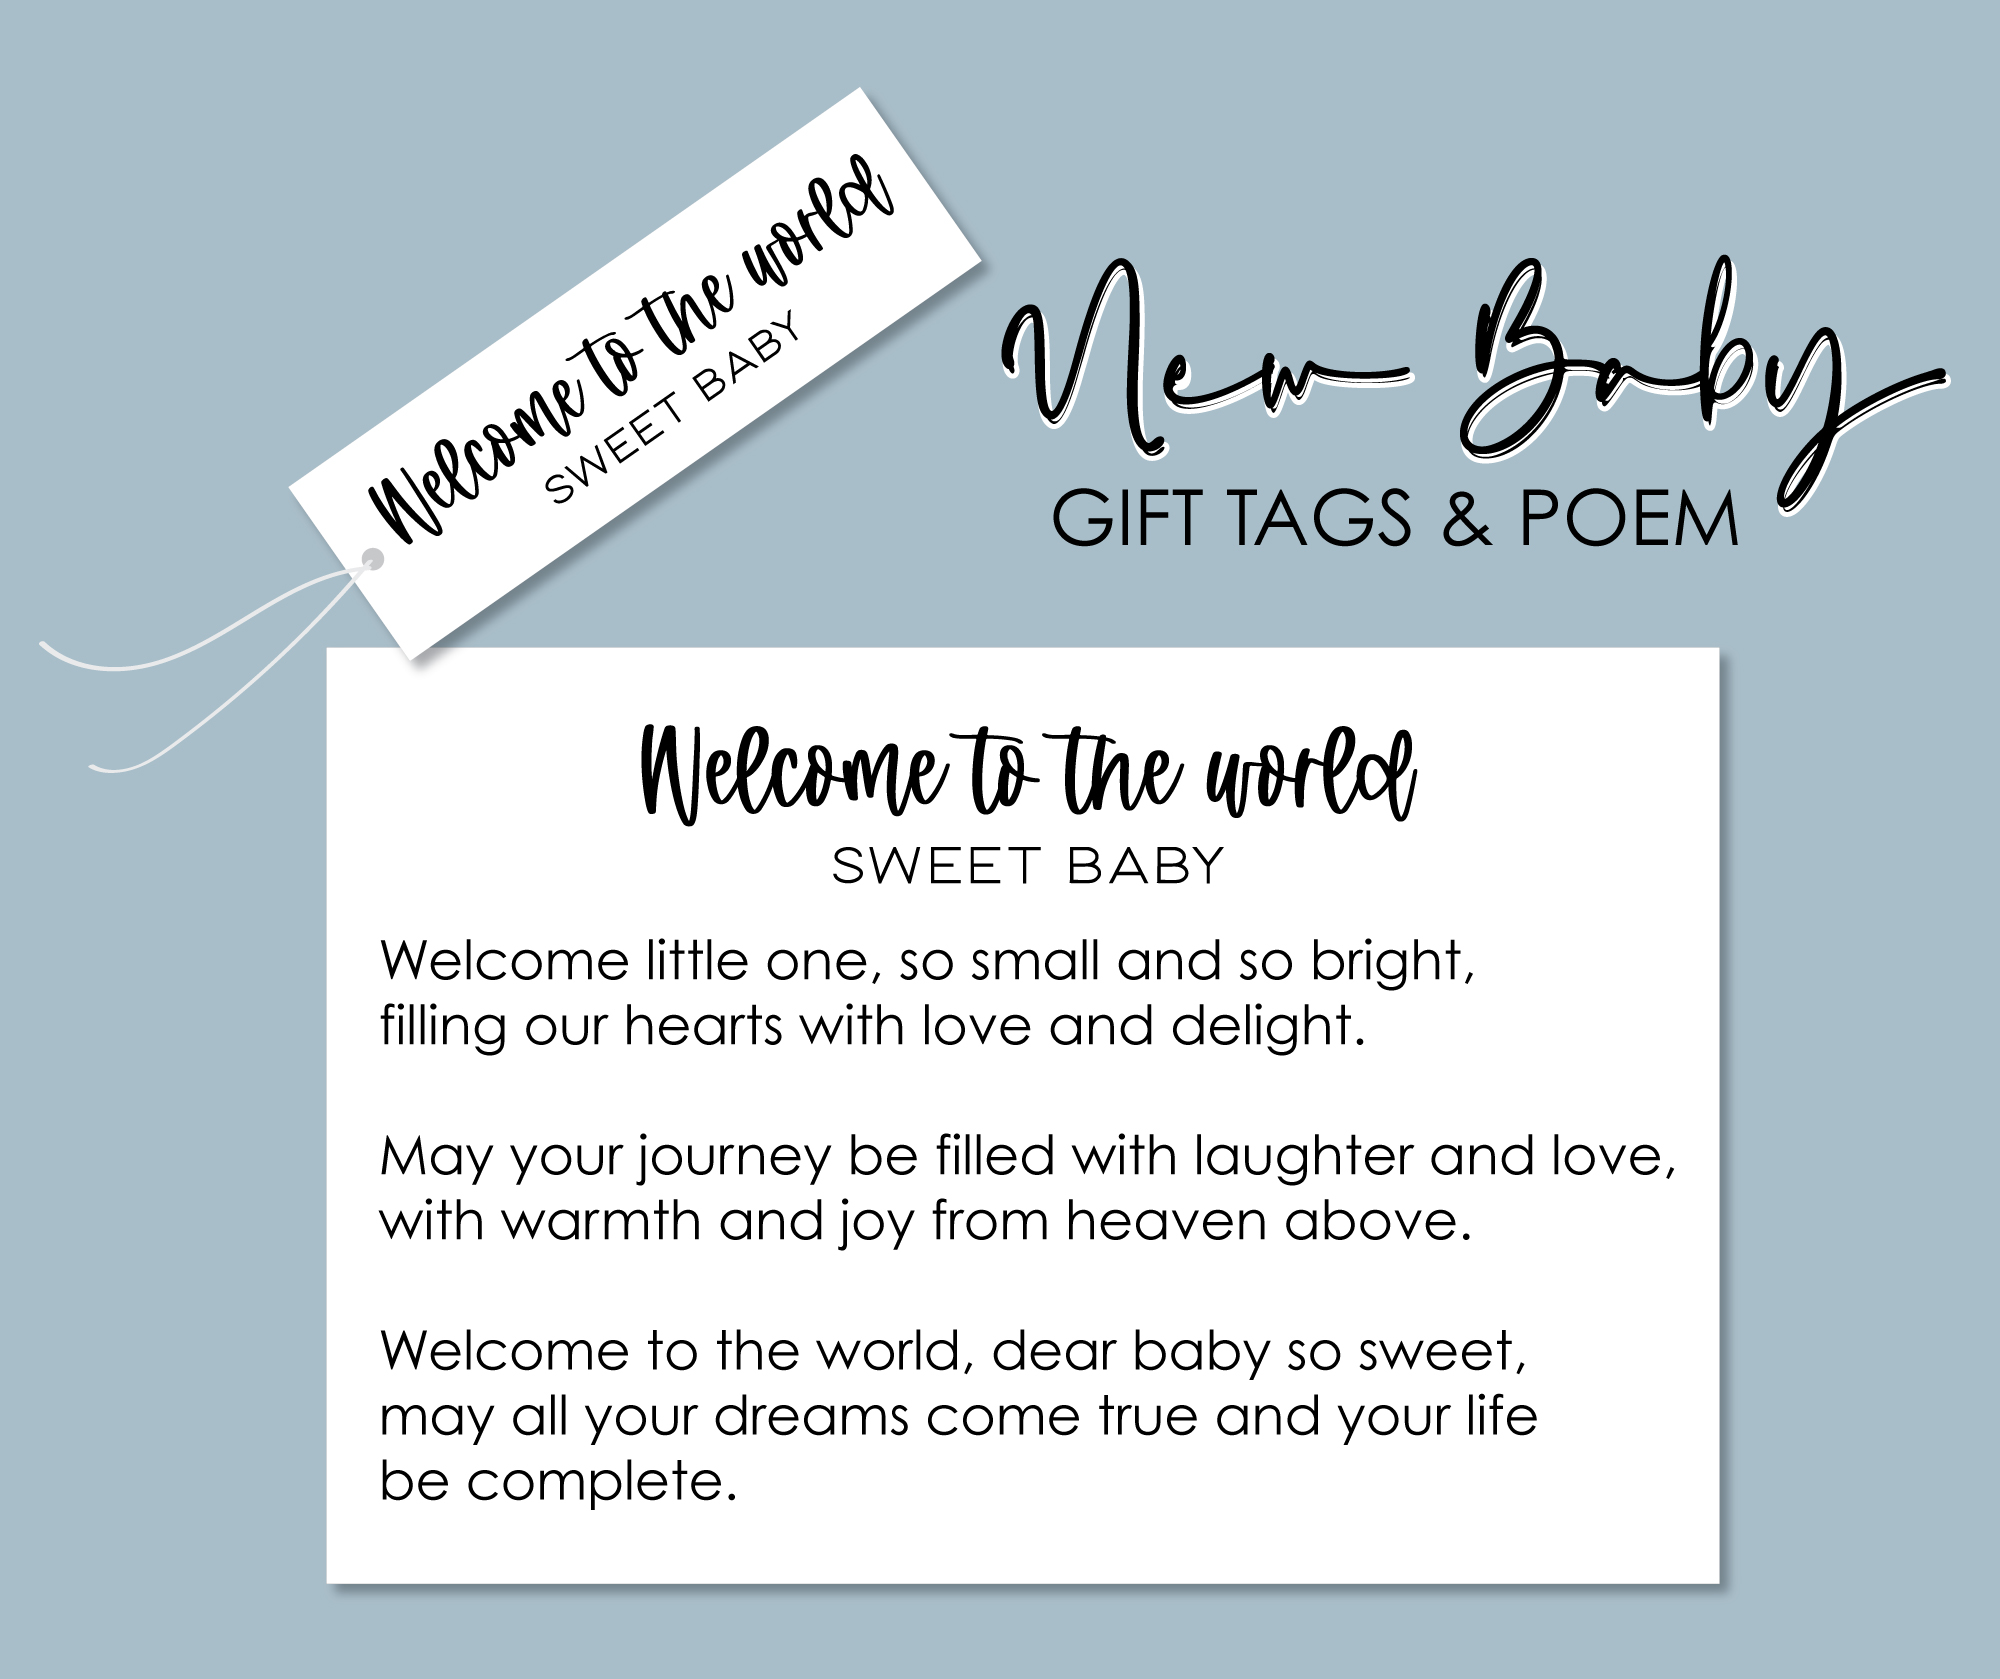 new baby tag and poem